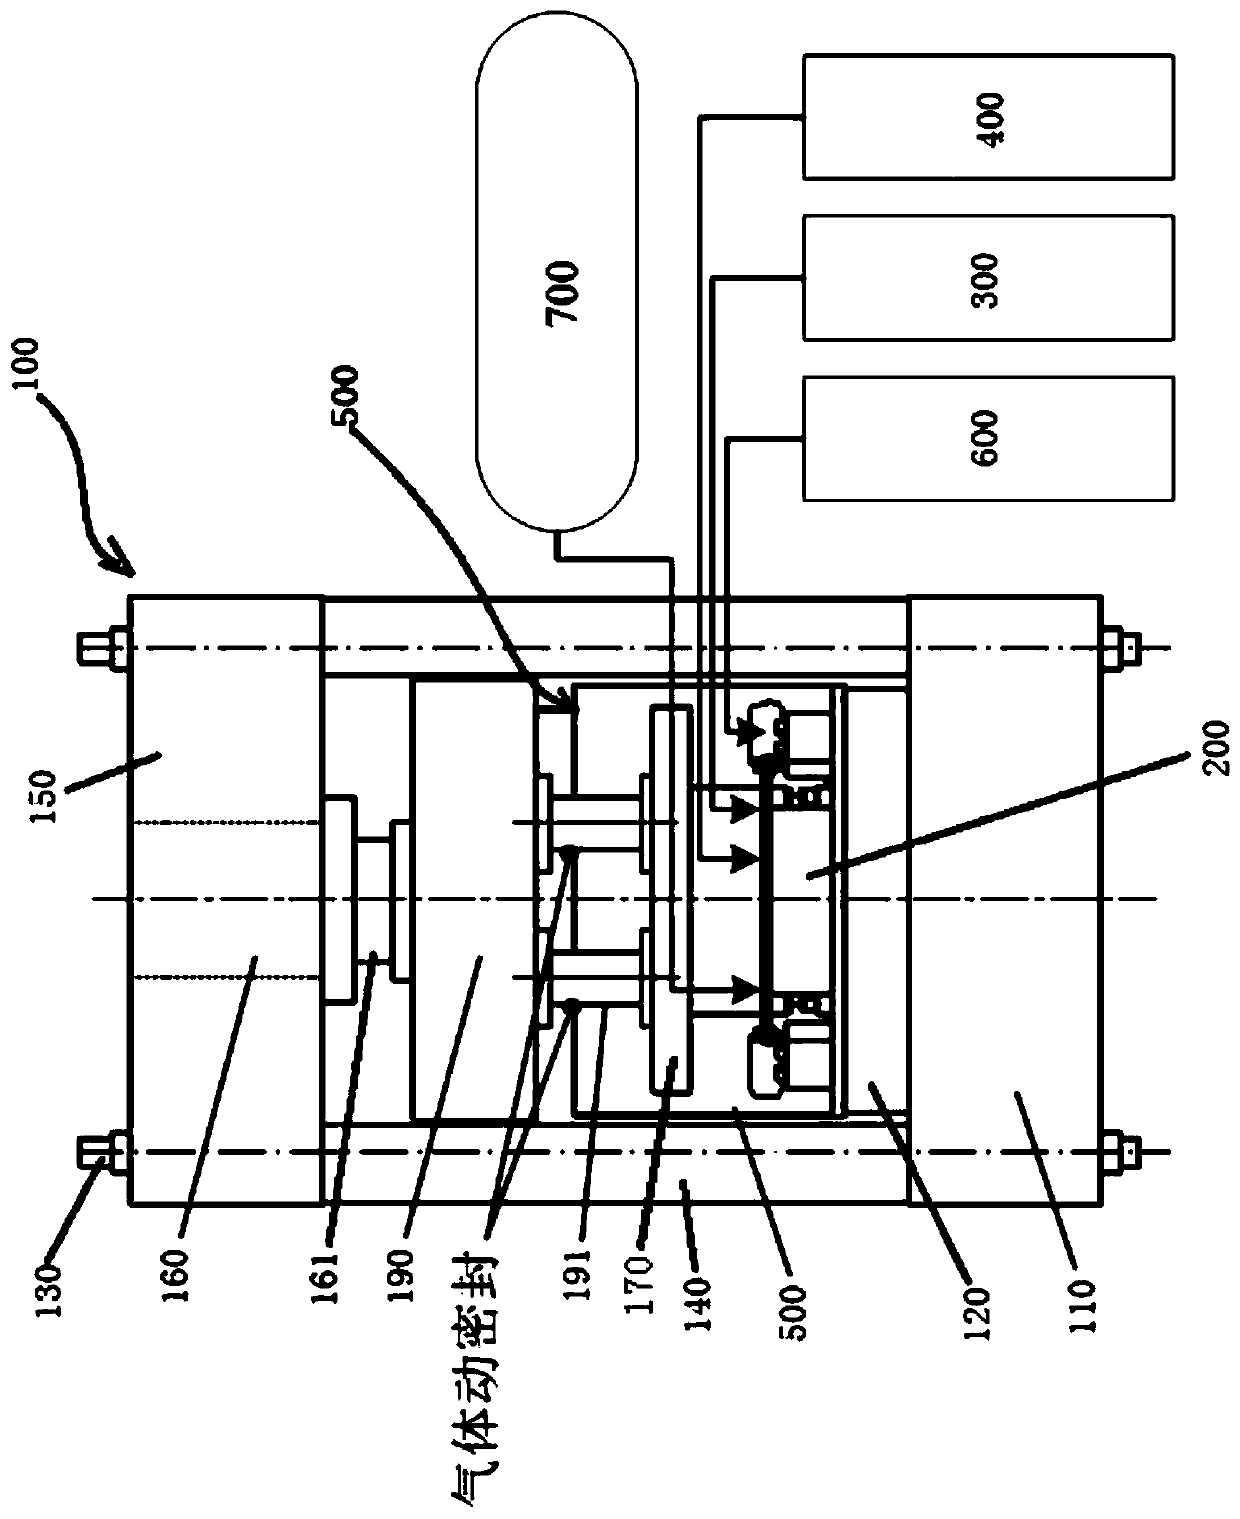 Hot metal gas forming and quenching system and process